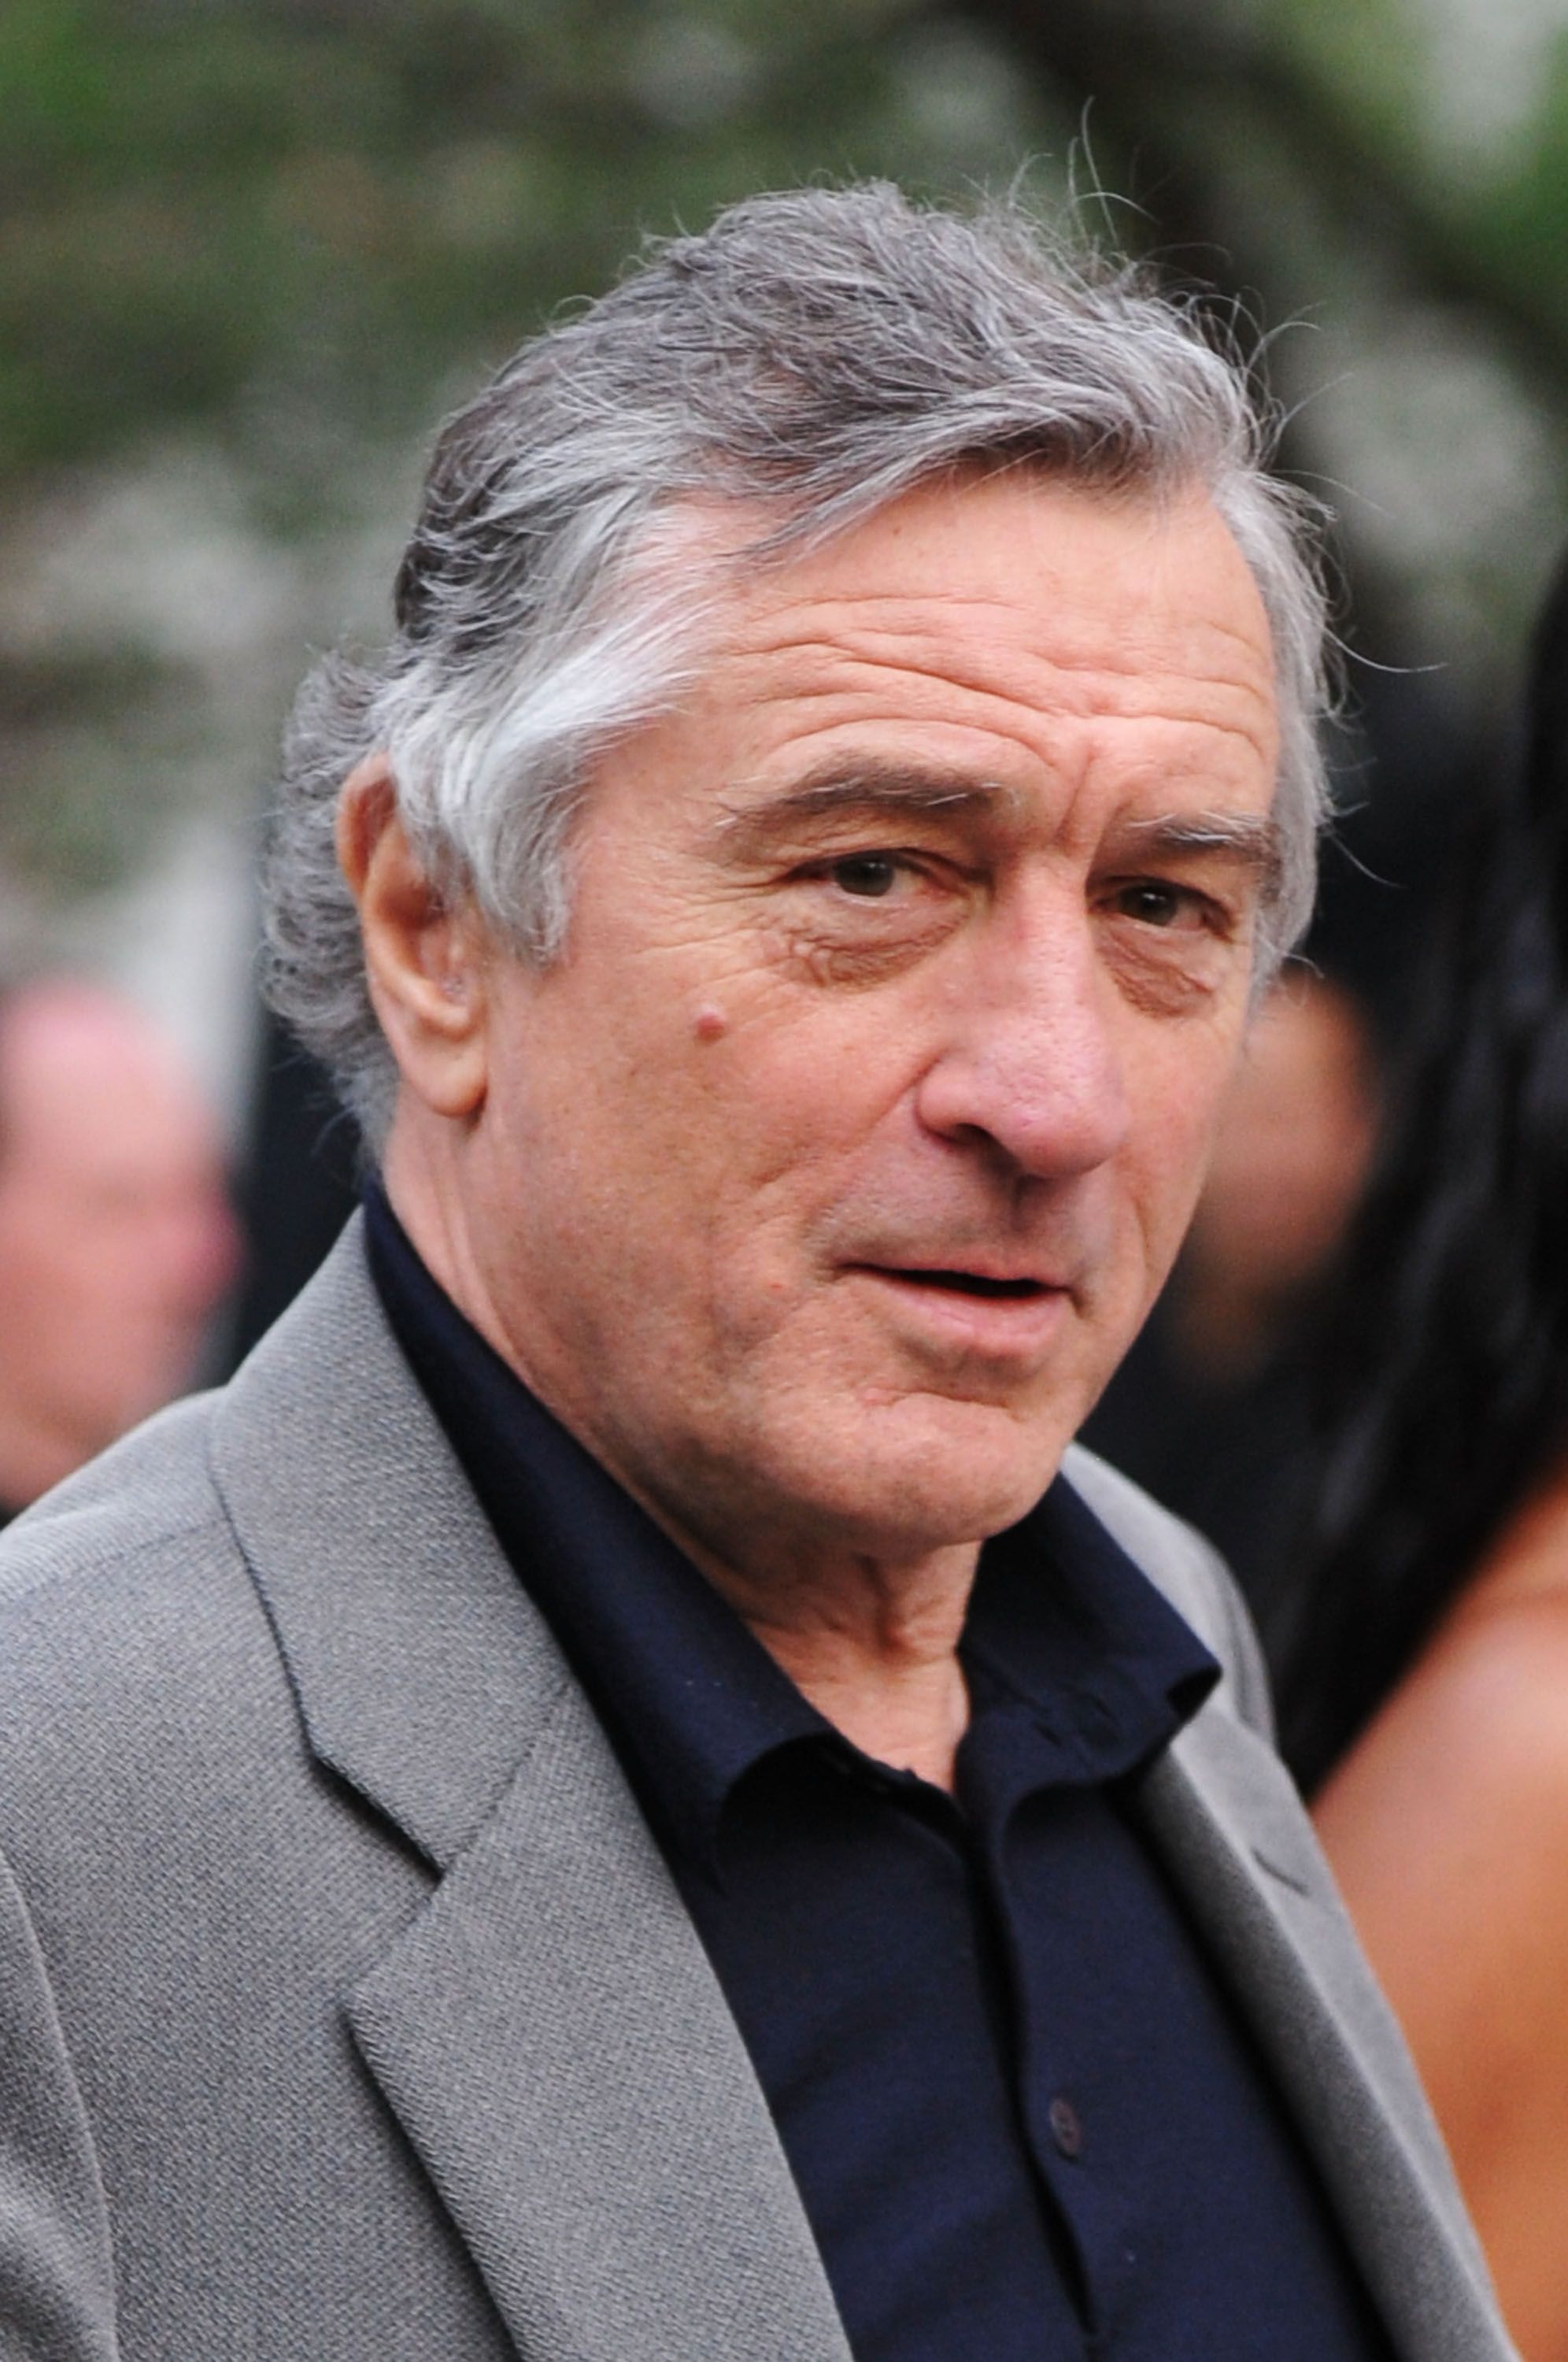 Robert De Niro attends the Vanity Fair party before the 2010 Tribeca Film Festival at the New York State Supreme Court on April 20, 2010 in New York City. | Source: Getty Images